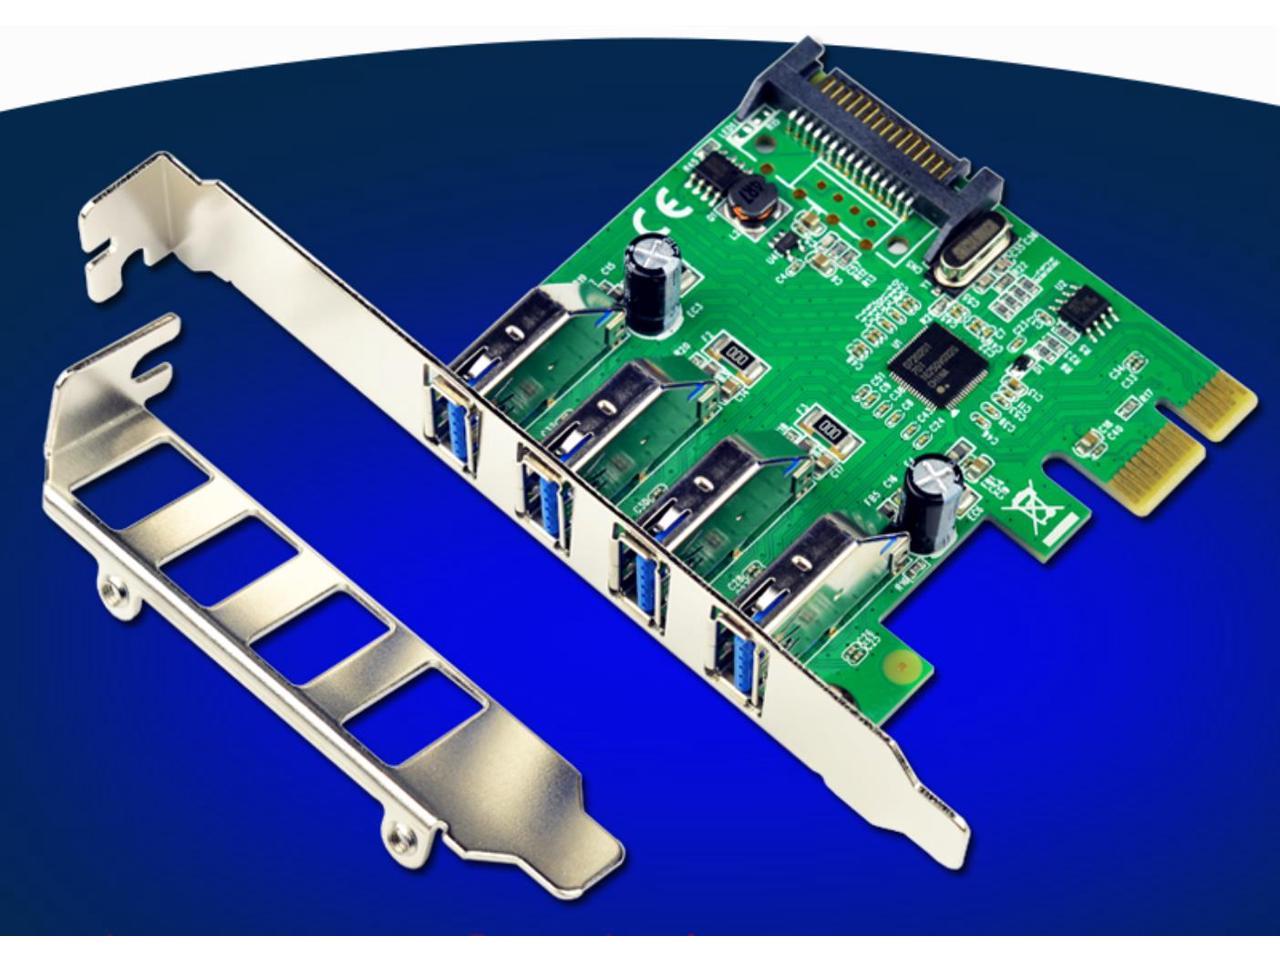 usb 3.0 pci express card with power